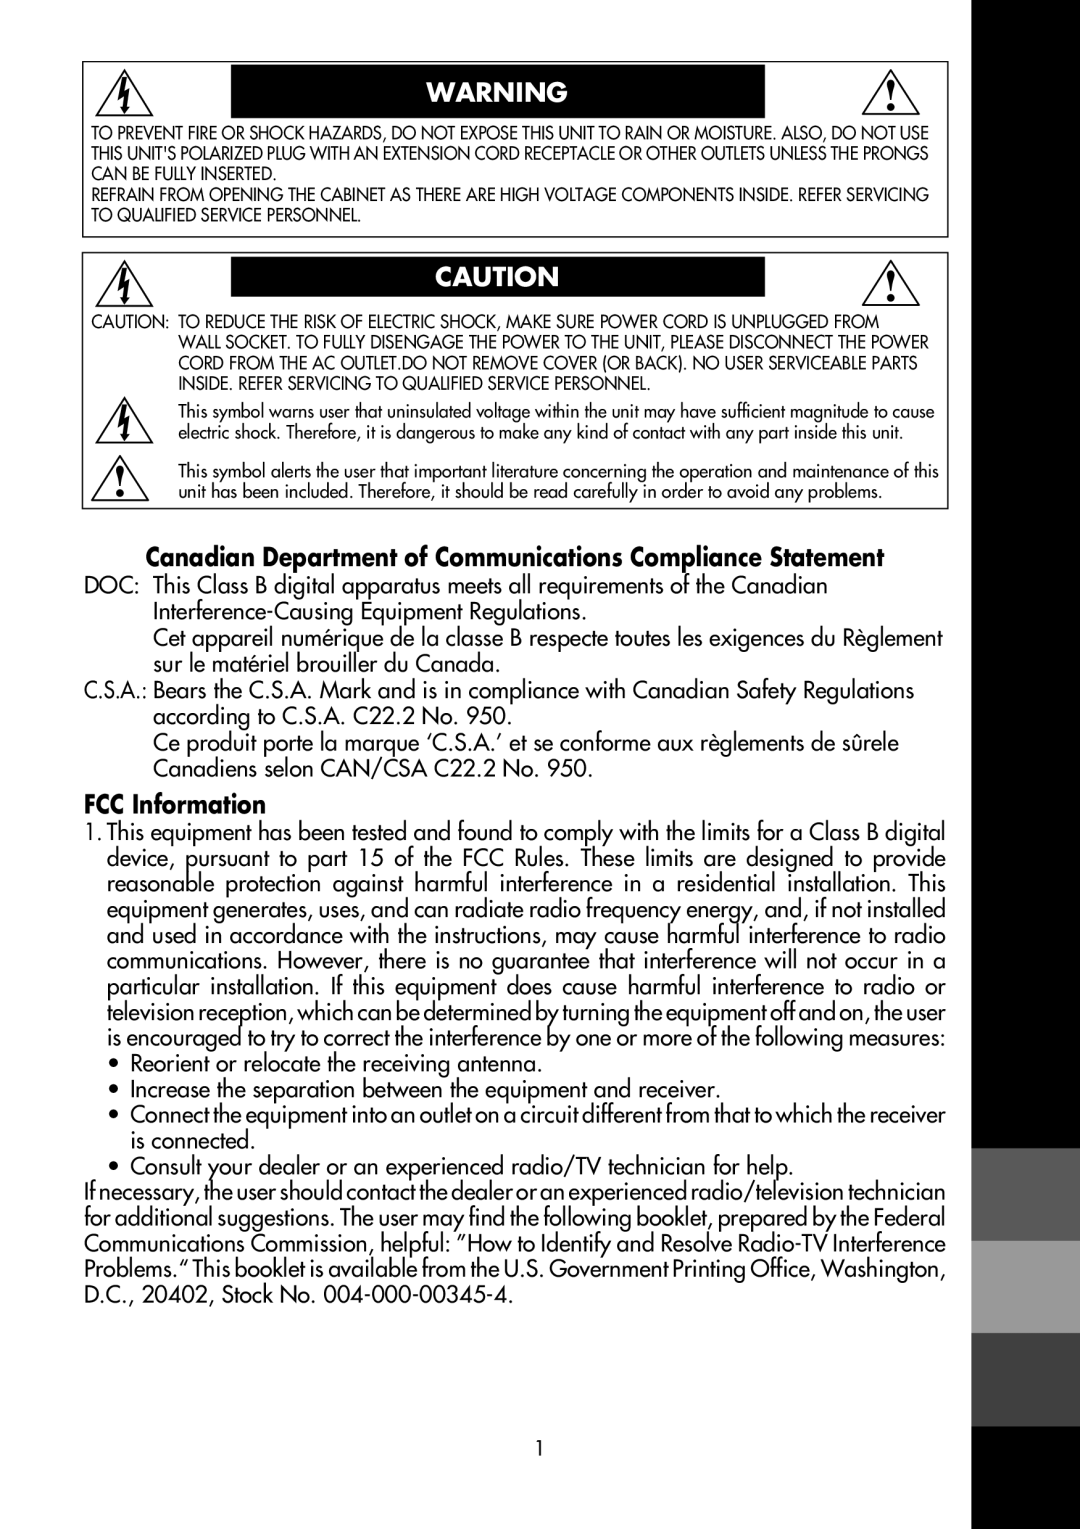 NEC LCD1700M user manual Canadian Department of Communications Compliance Statement, FCC Information 